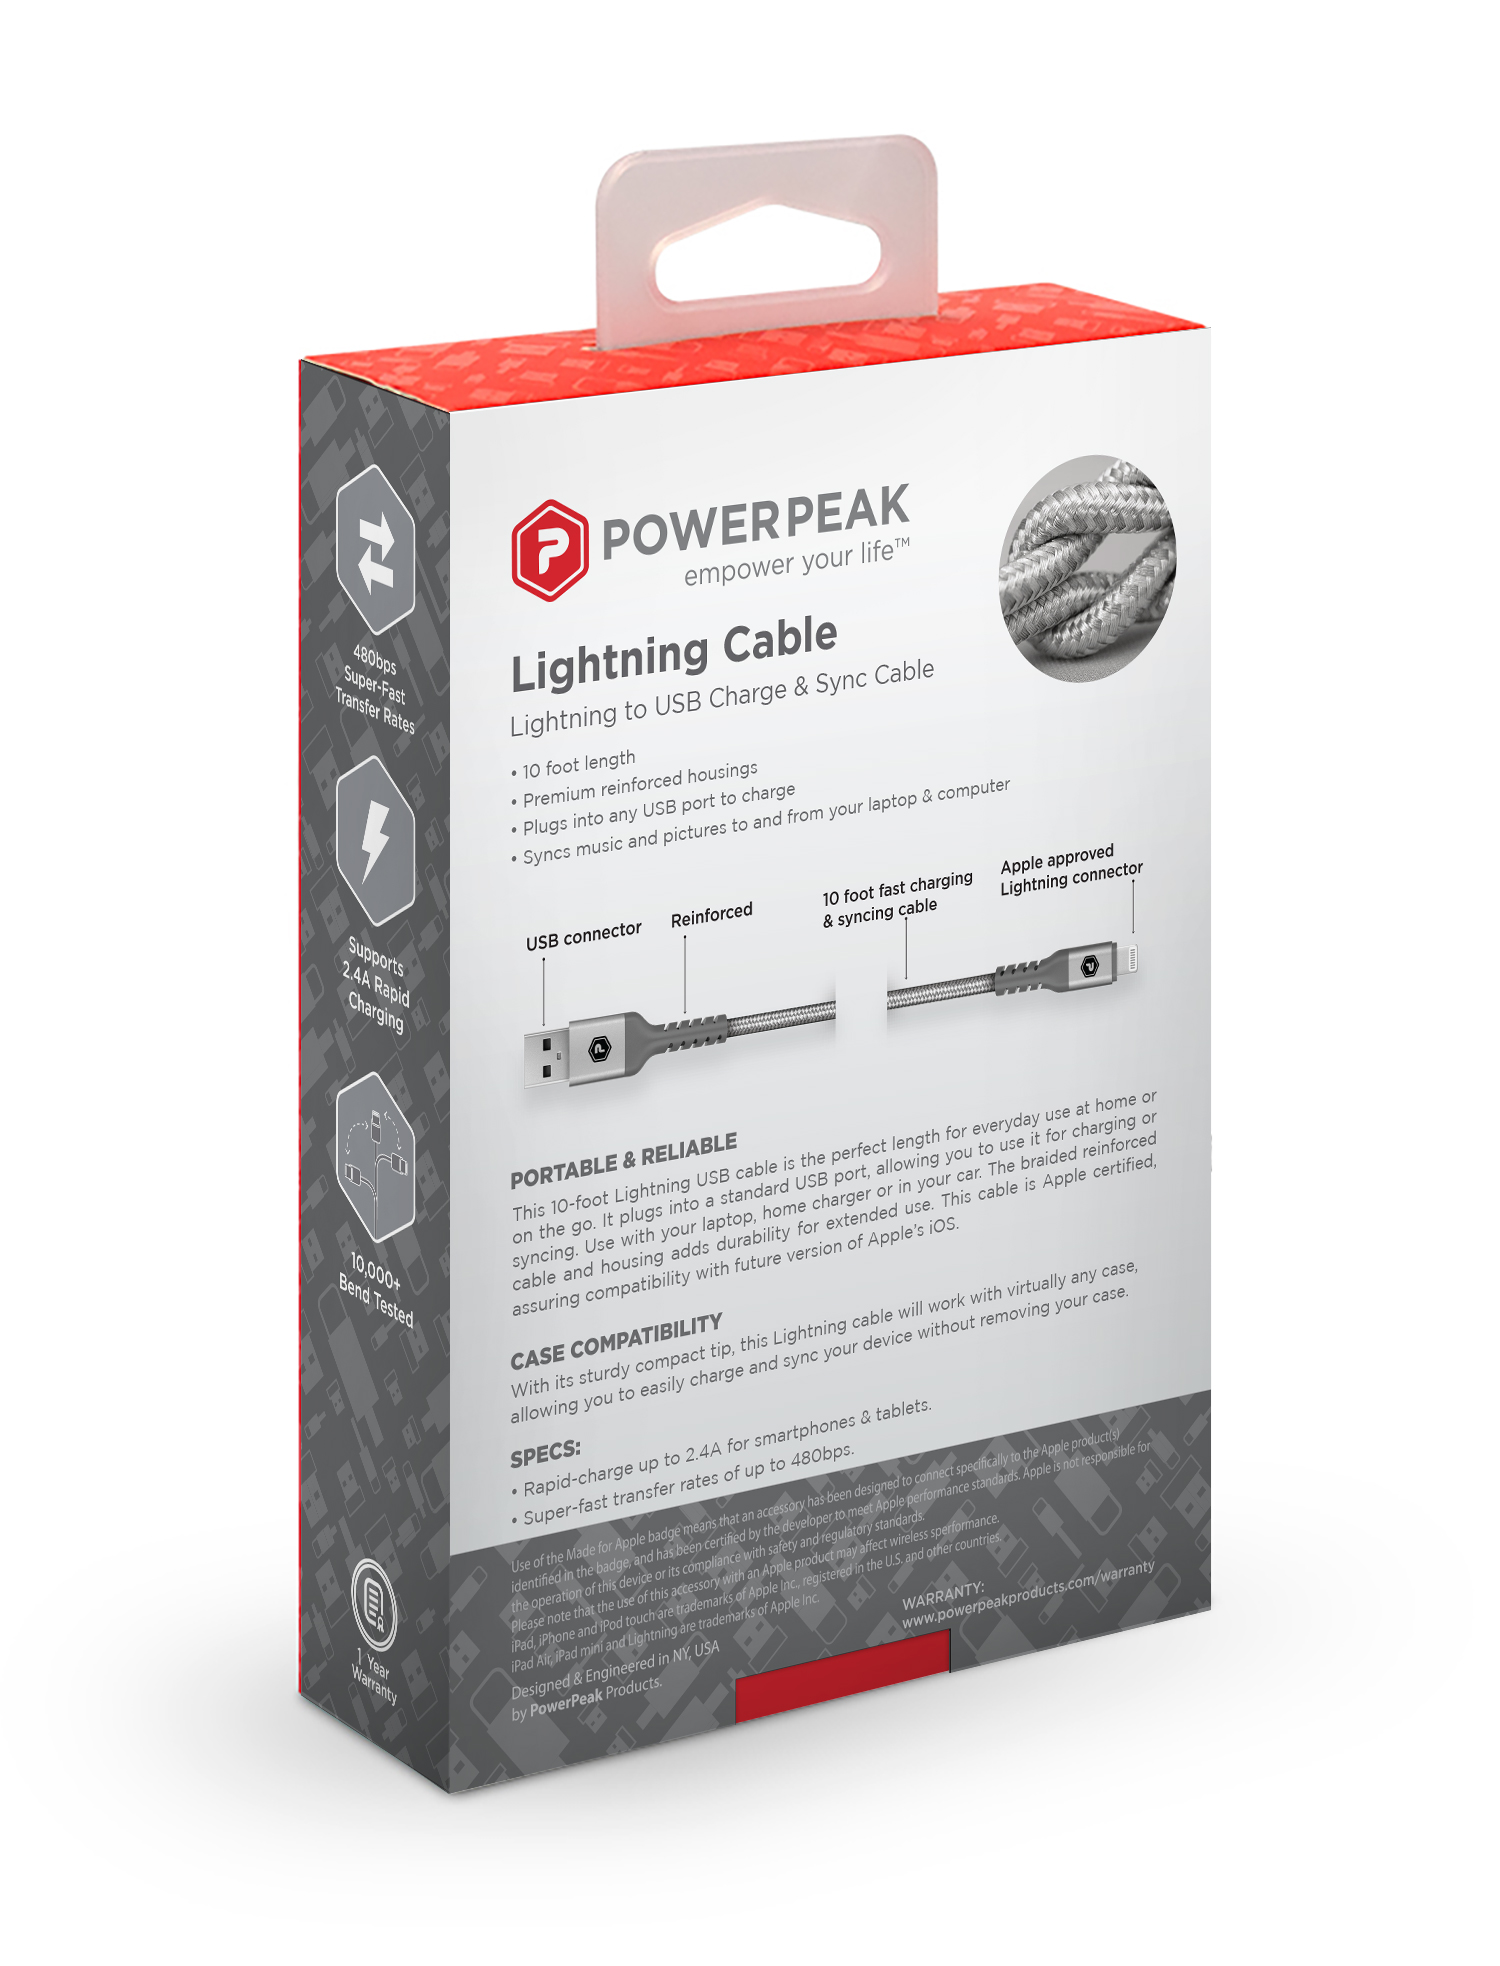 PowerPeak Extra-long Premium Braided Lightning Cable 10 FT. Metallic USB Charge & Sync Cable - Silver